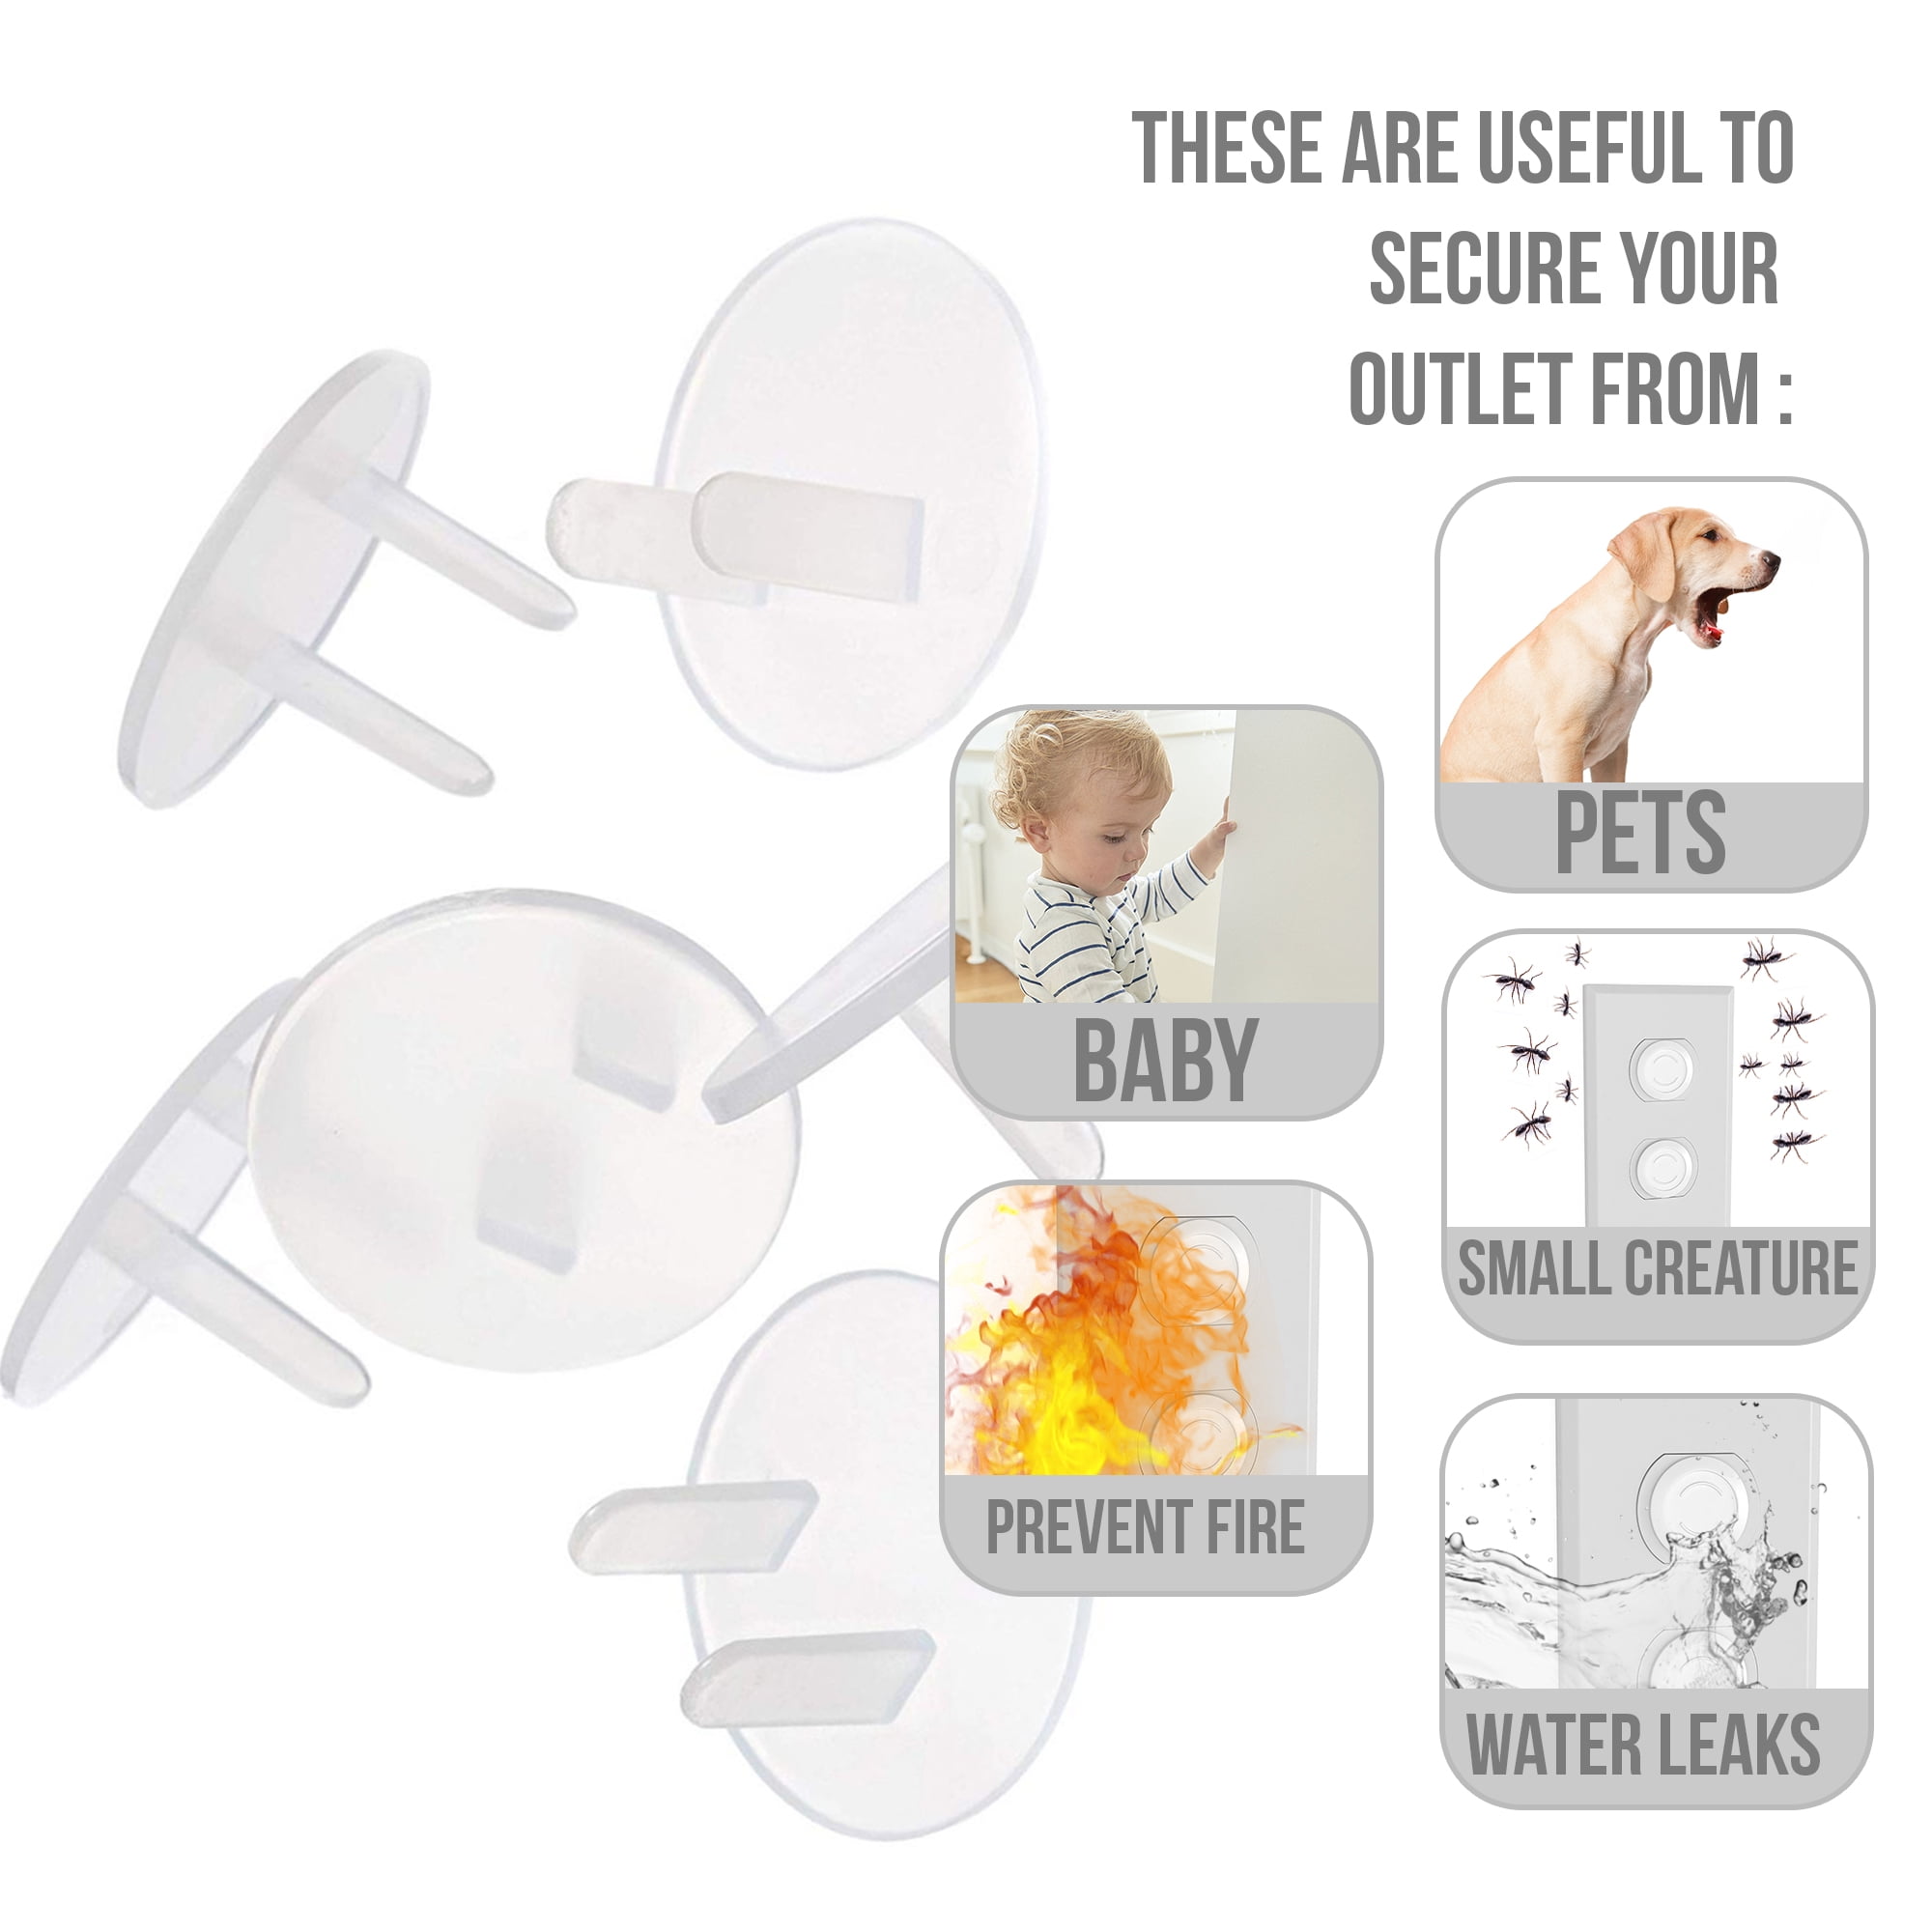 Baby Proofing Your Home? Your Baby & Electrical Safety - BGP Maintenance